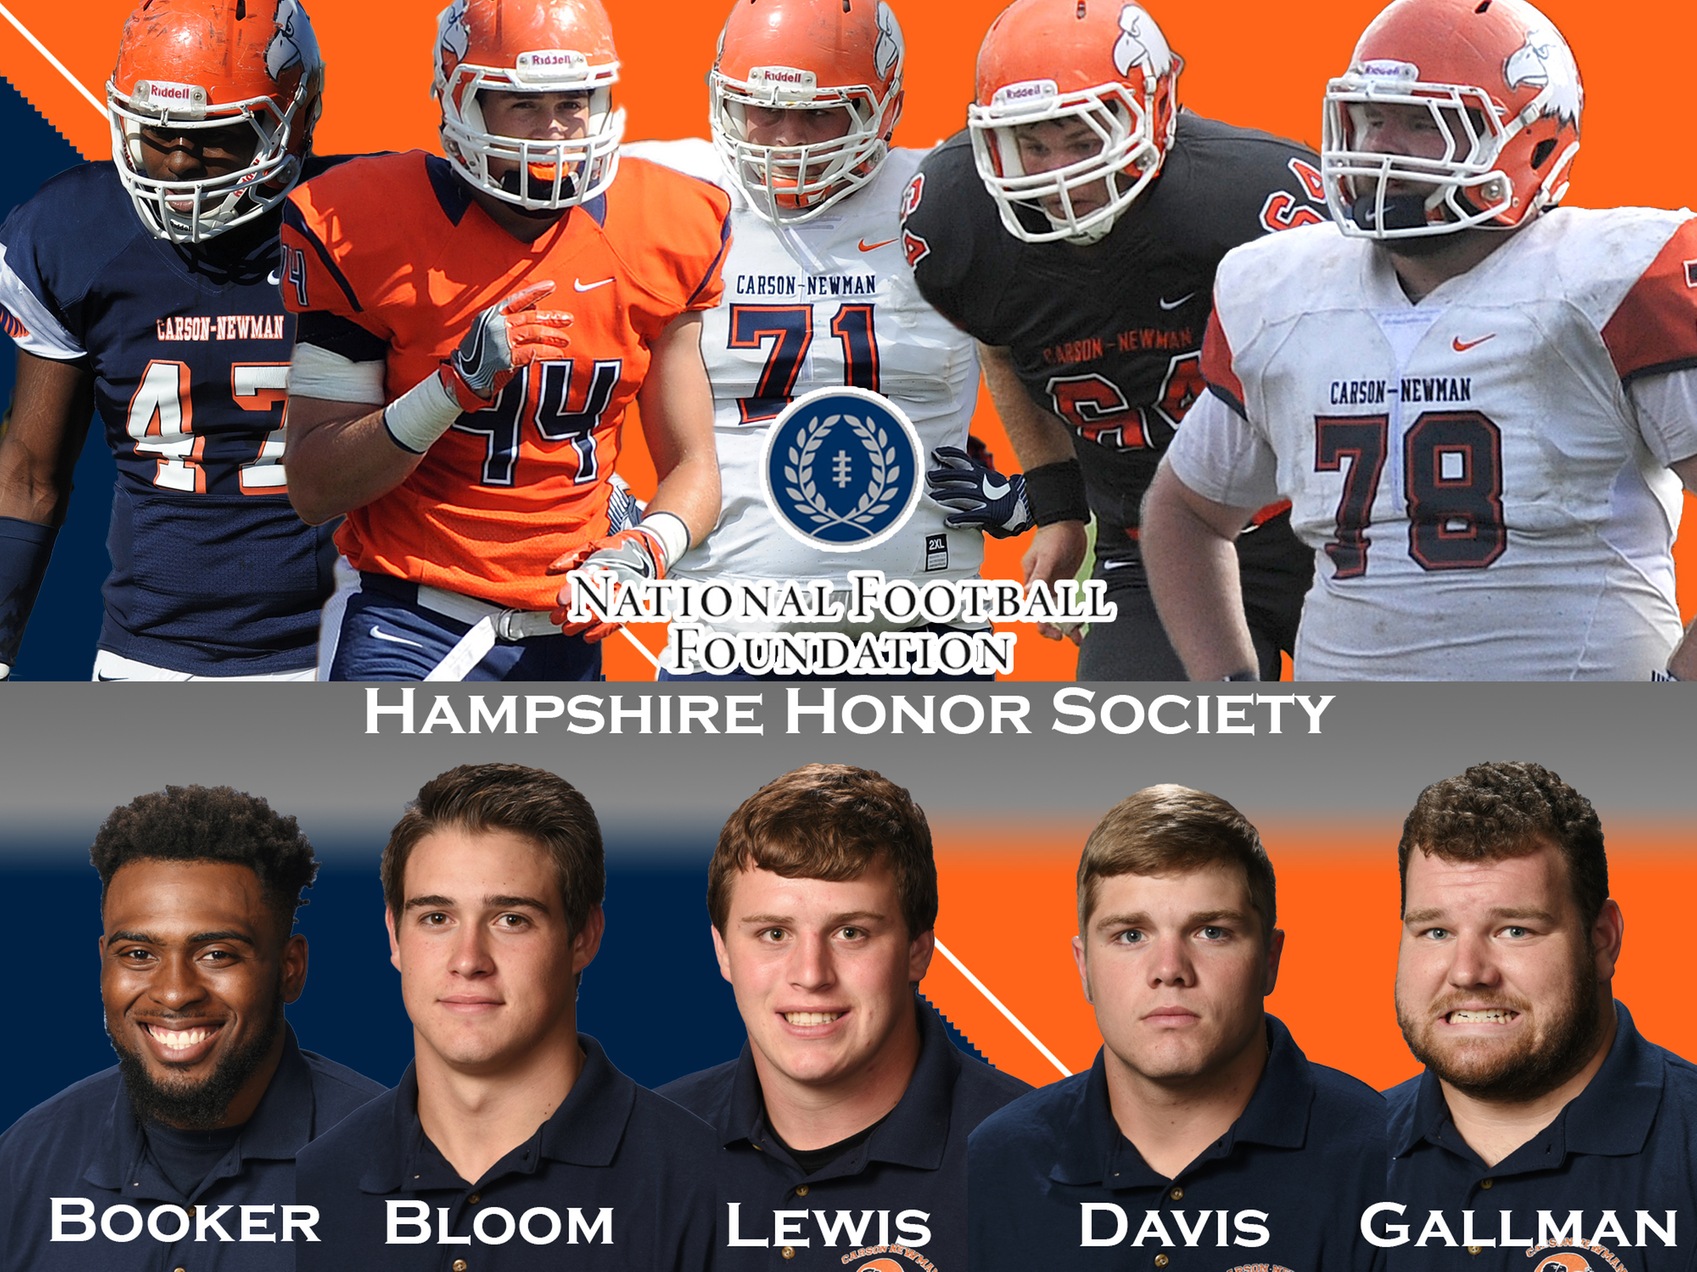 Five Eagles named to National Football Foundation’s Hampshire Honor Society